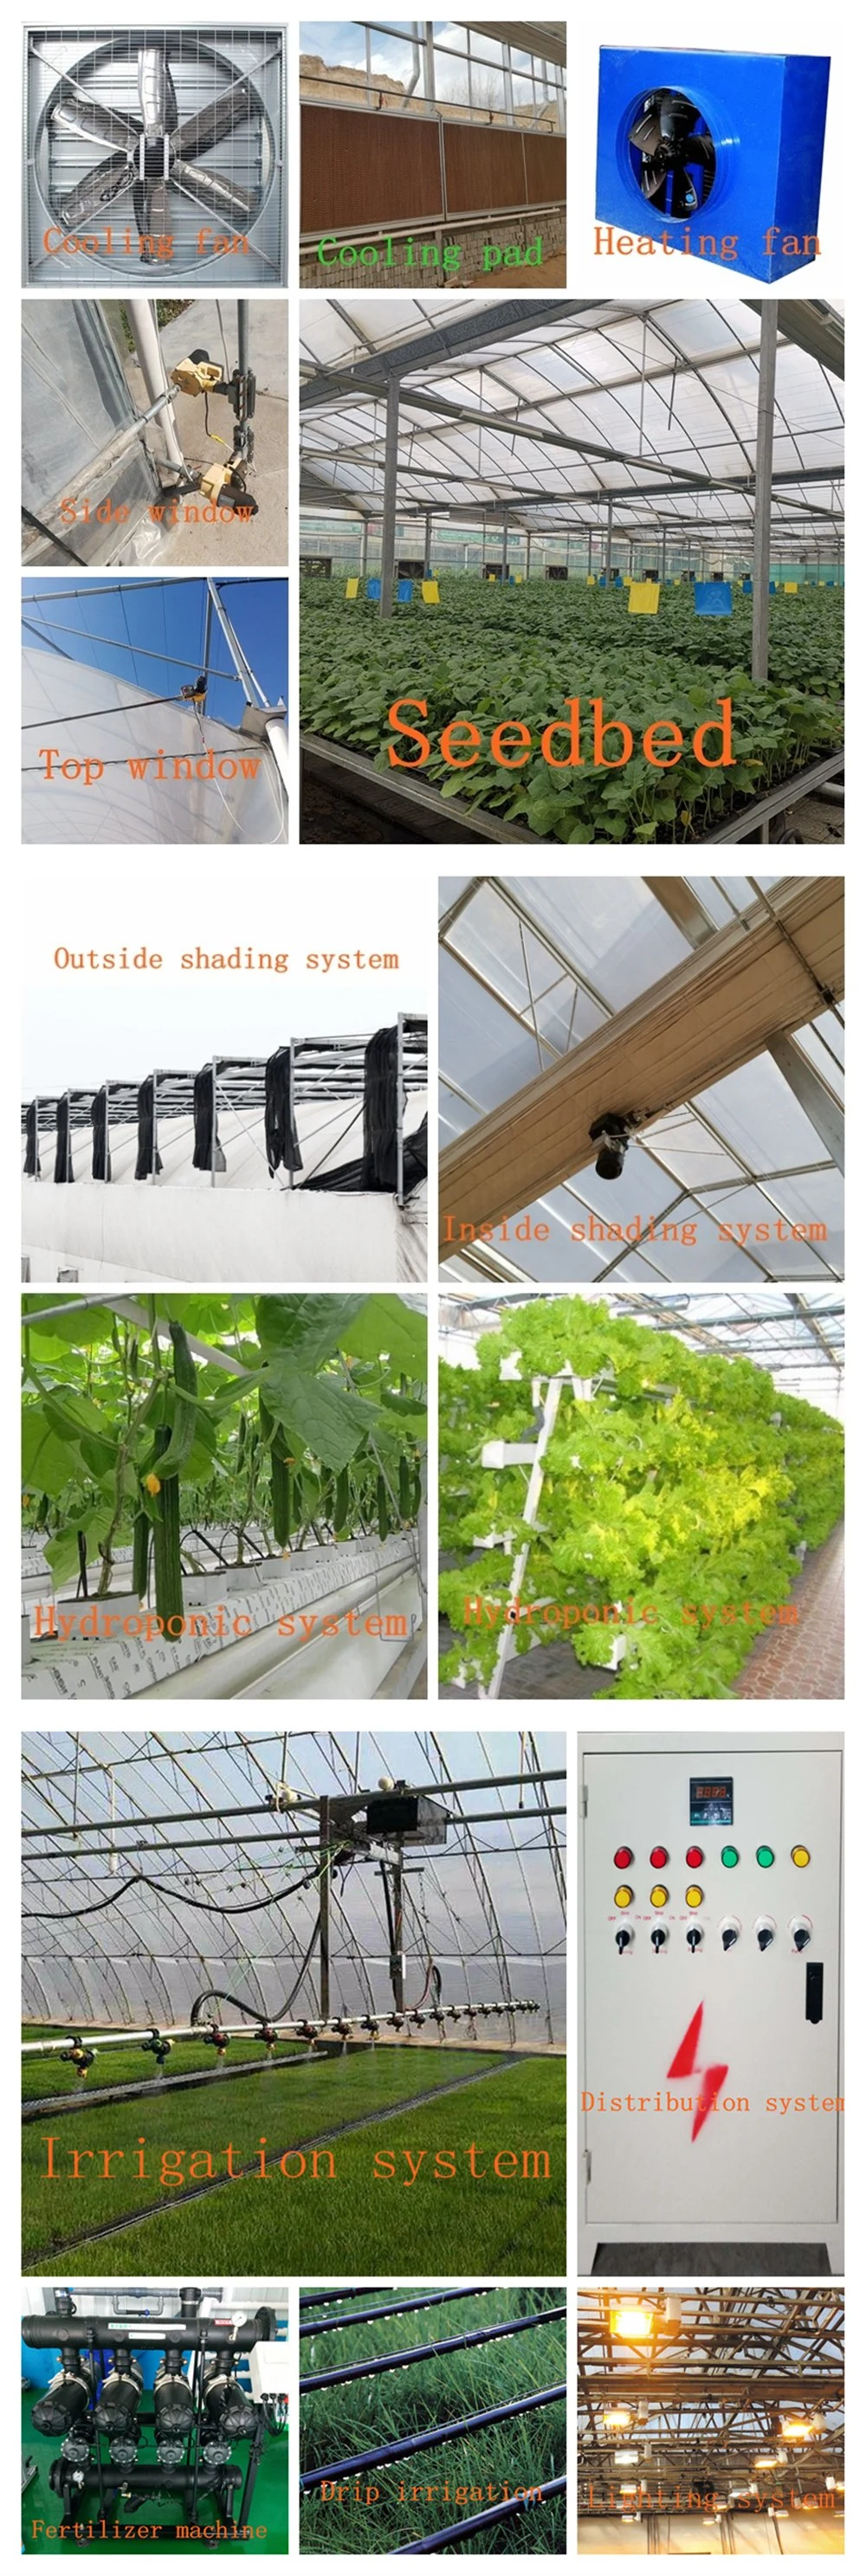 High Tunnel Commercial/Agricultural Hydroponic Film Greenhouse for Vegetables/Fruits/Cucumbers/Lettuces/Flowers